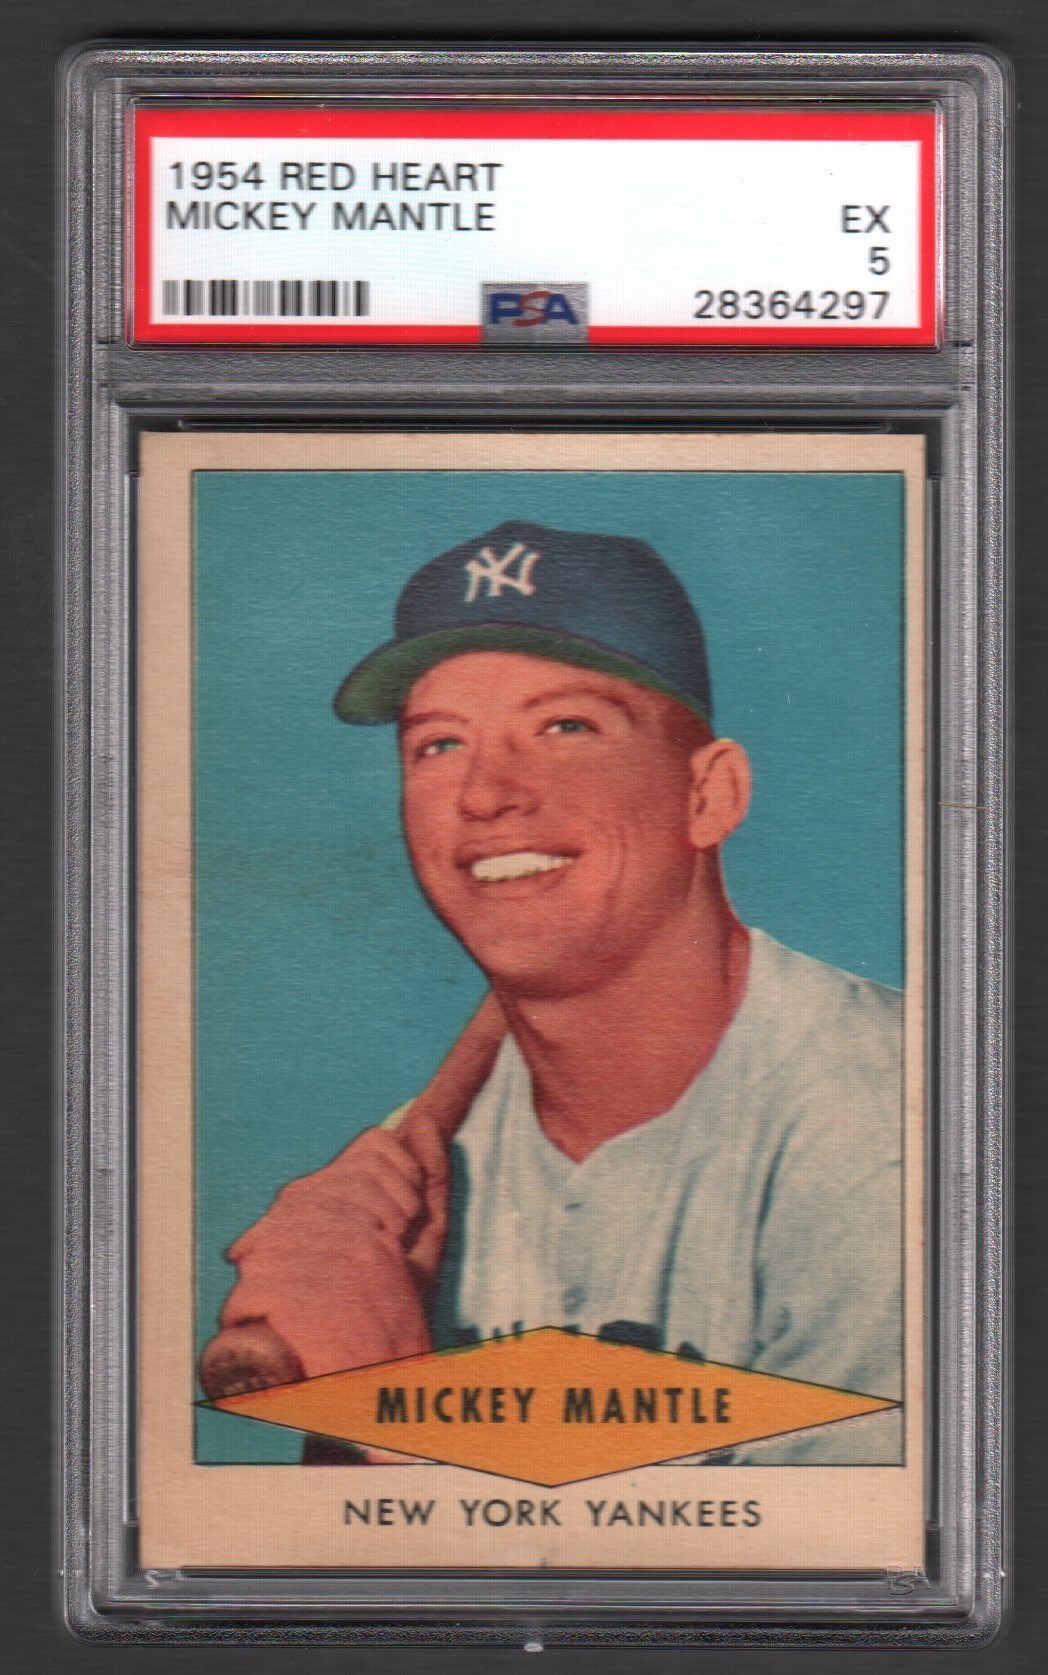 - 1954 Red Heart Mickey Mantle - PSA EX 5